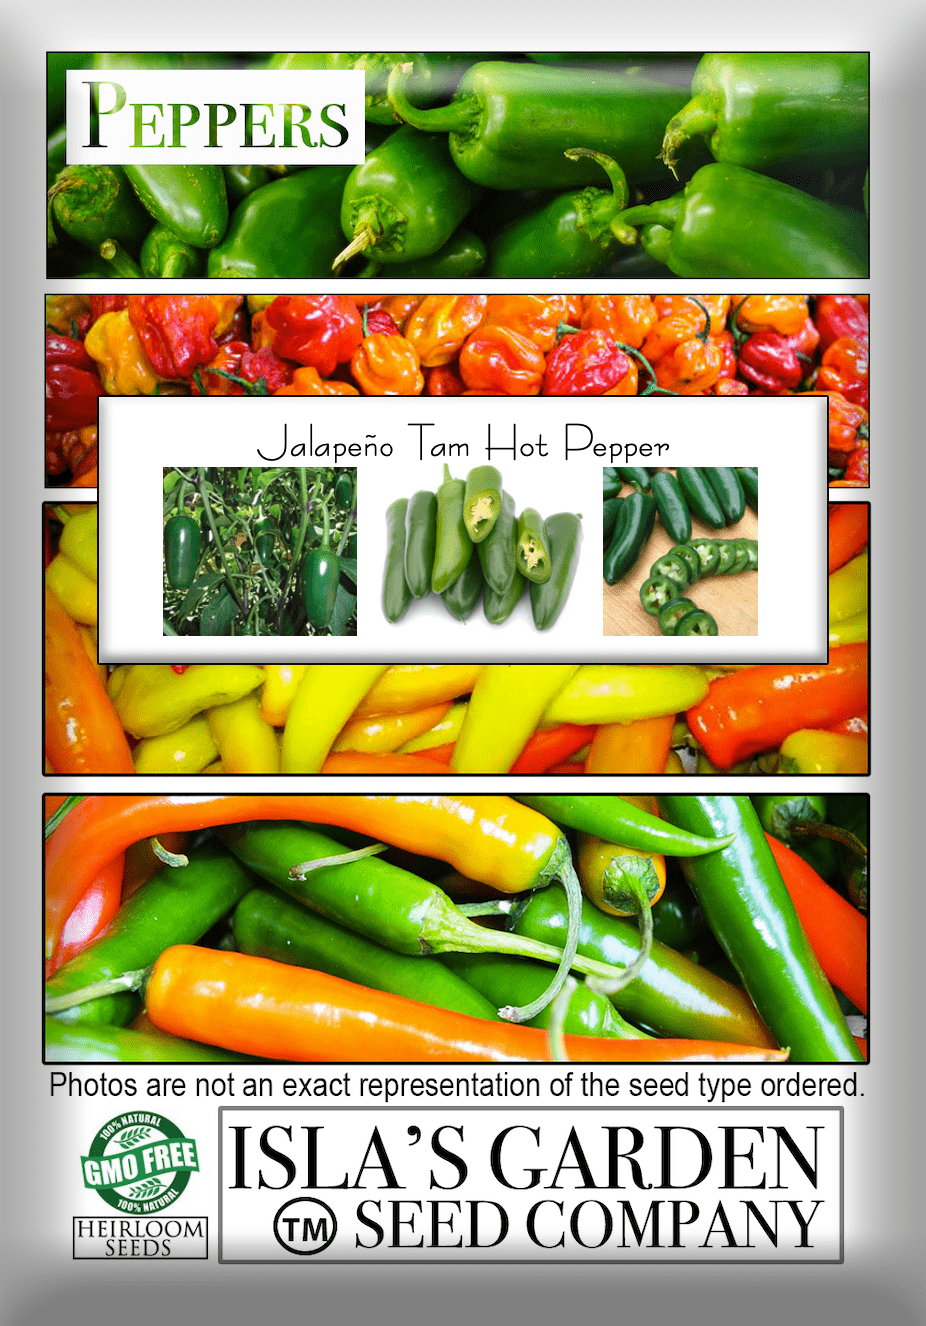 Jalapeno Tam Hot Pepper, 150 Heirloom Seeds Per Packet, Non GMO Seeds